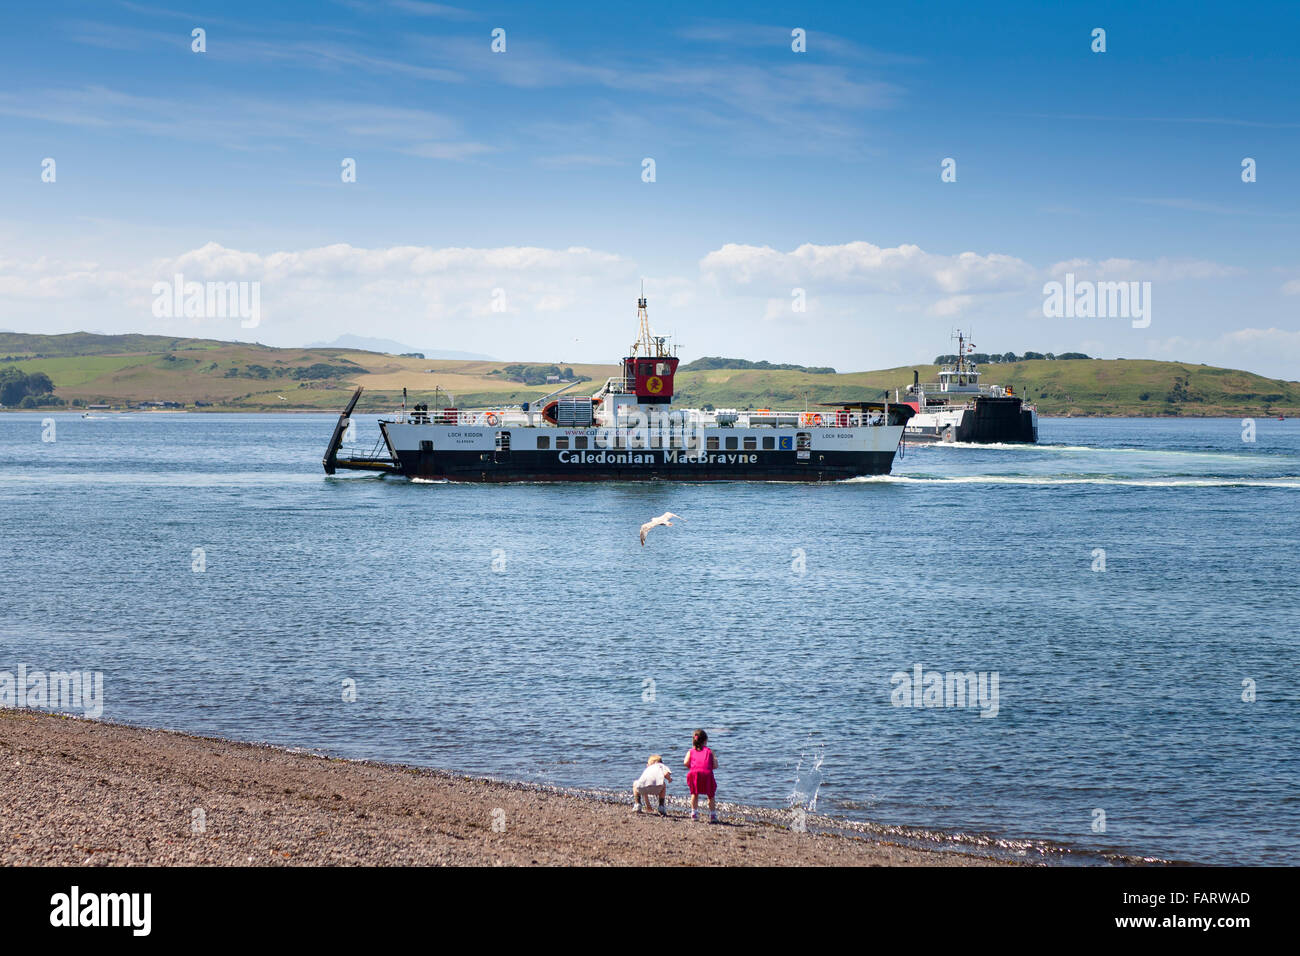 Caledonian MacBrayne ferry at Largs, North Ayrshire, Scotland, UK. The ferry is trafficking between Largs and Little Cumbrae Island  Model Release: No.  Property Release: No. Stock Photo